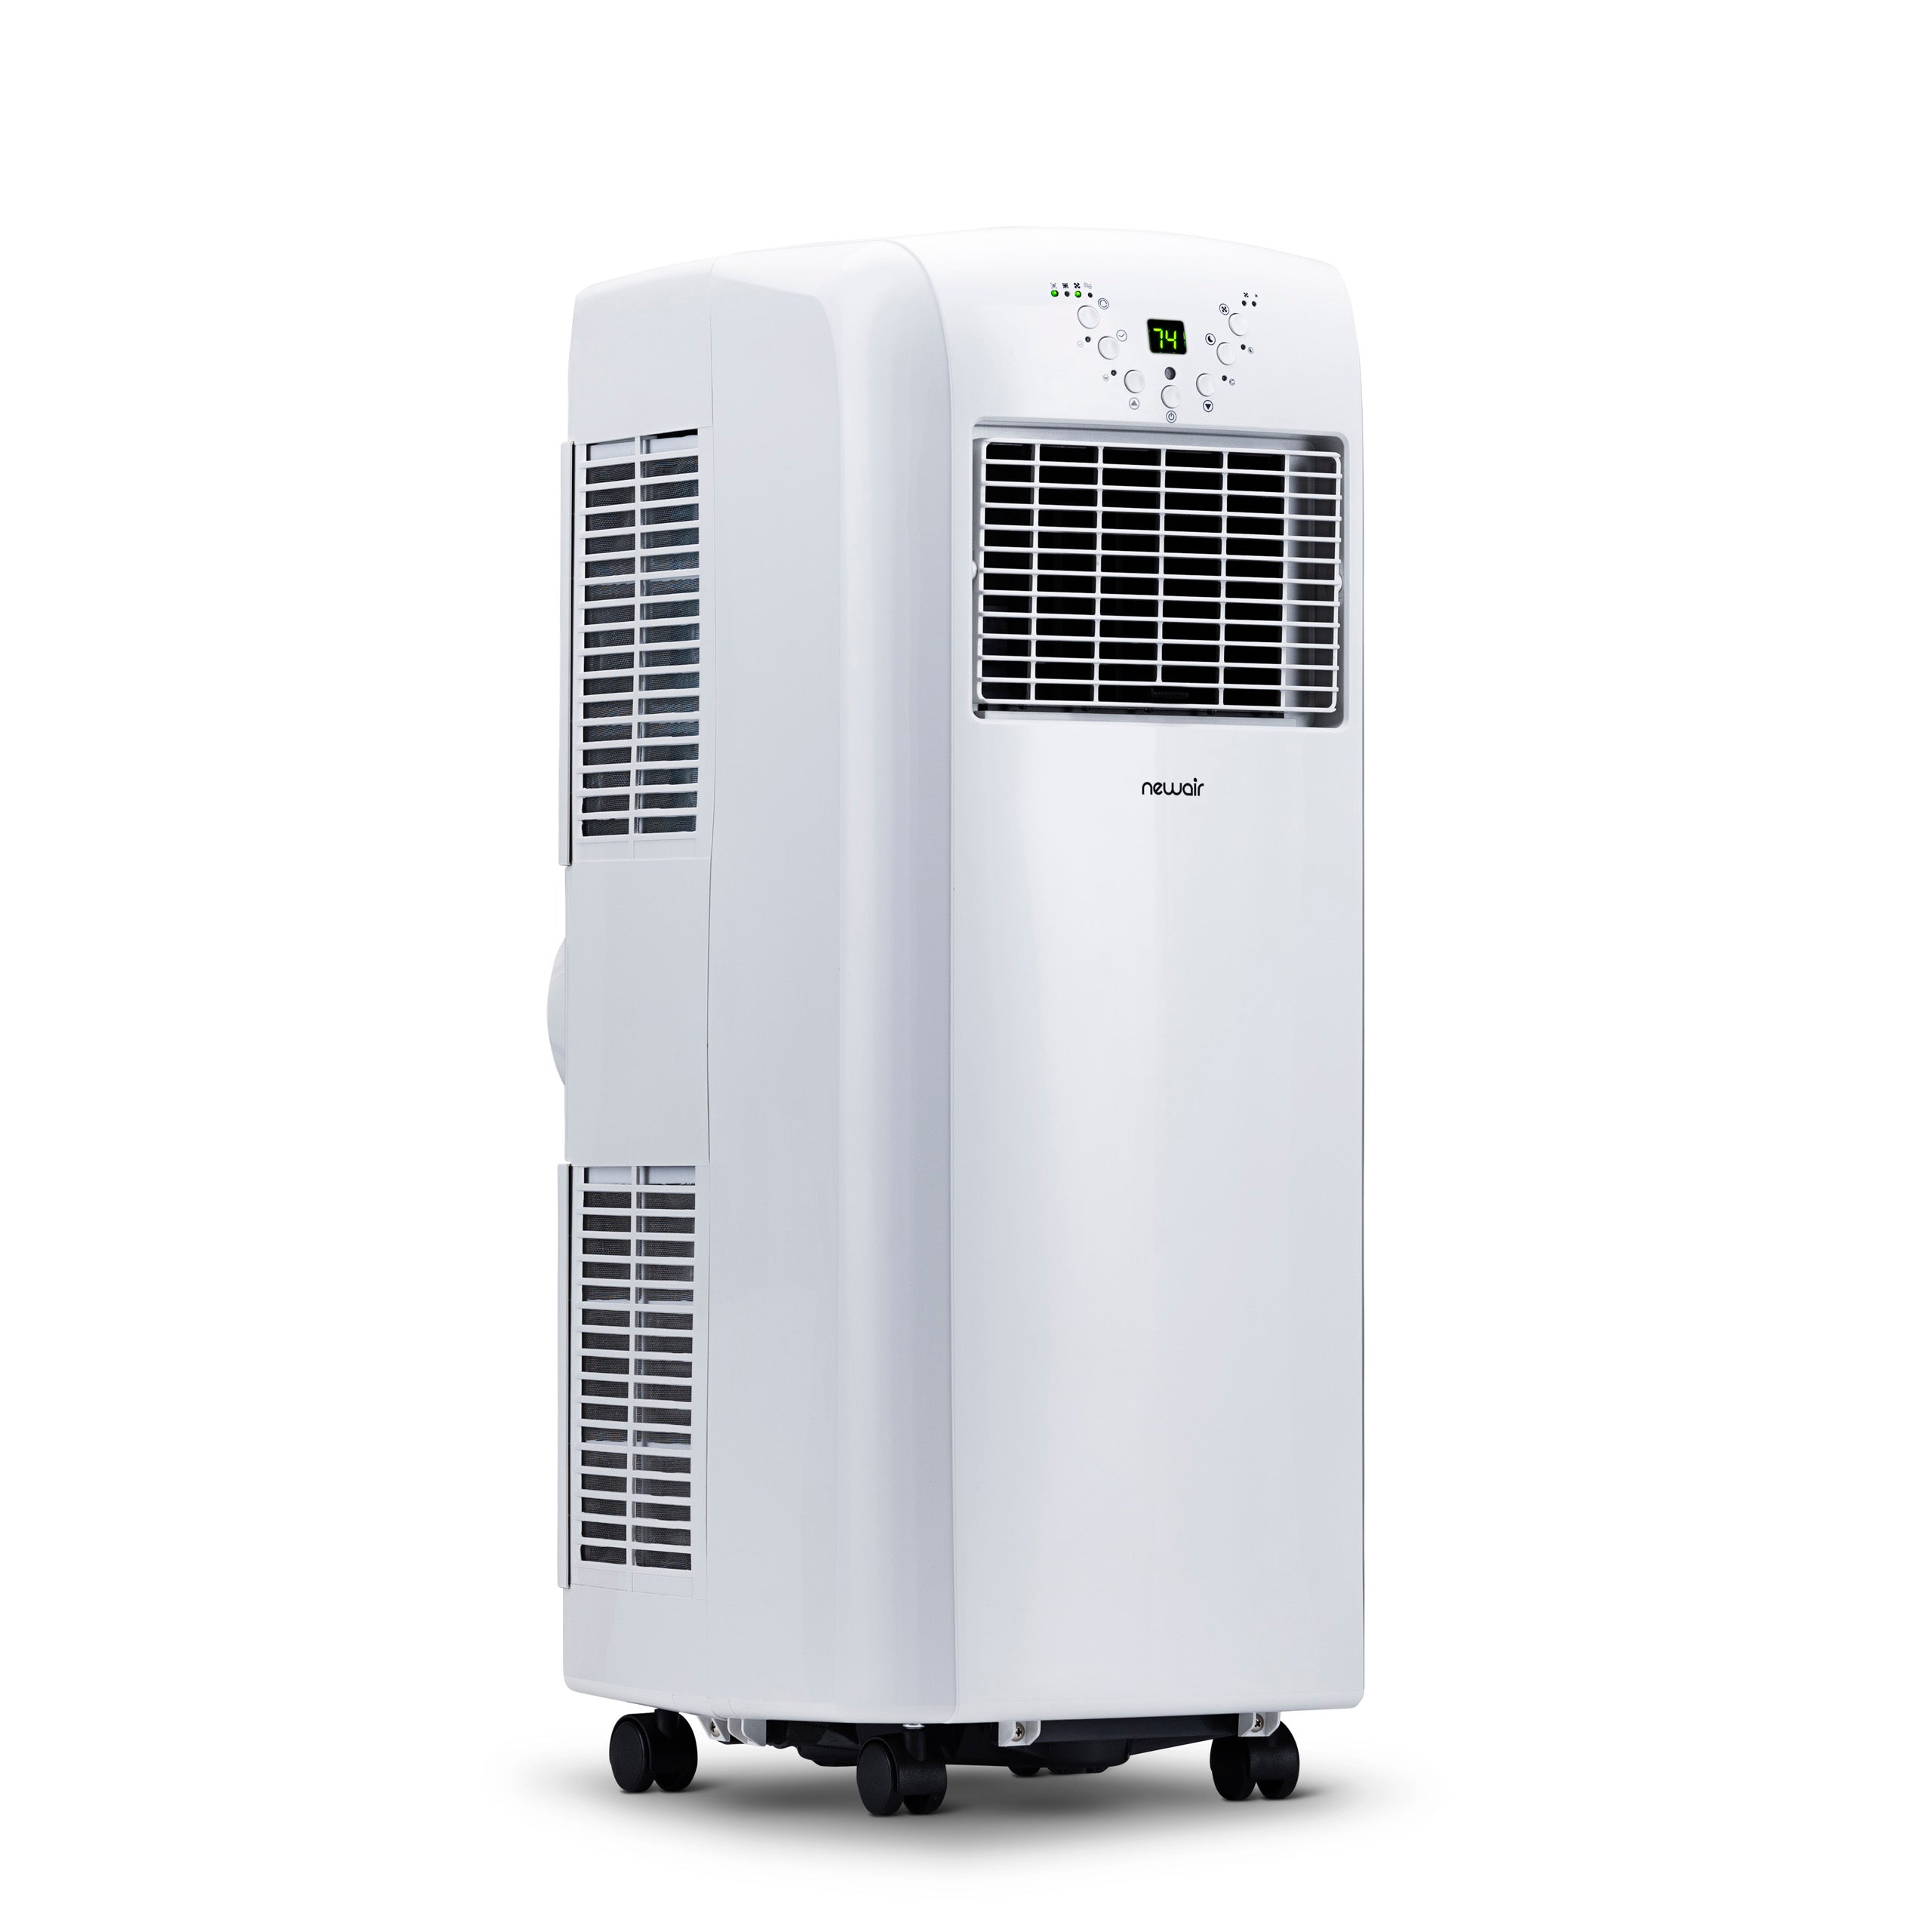 compact-portable-air-conditioning-cheapest-selection-save-67-jlcatj